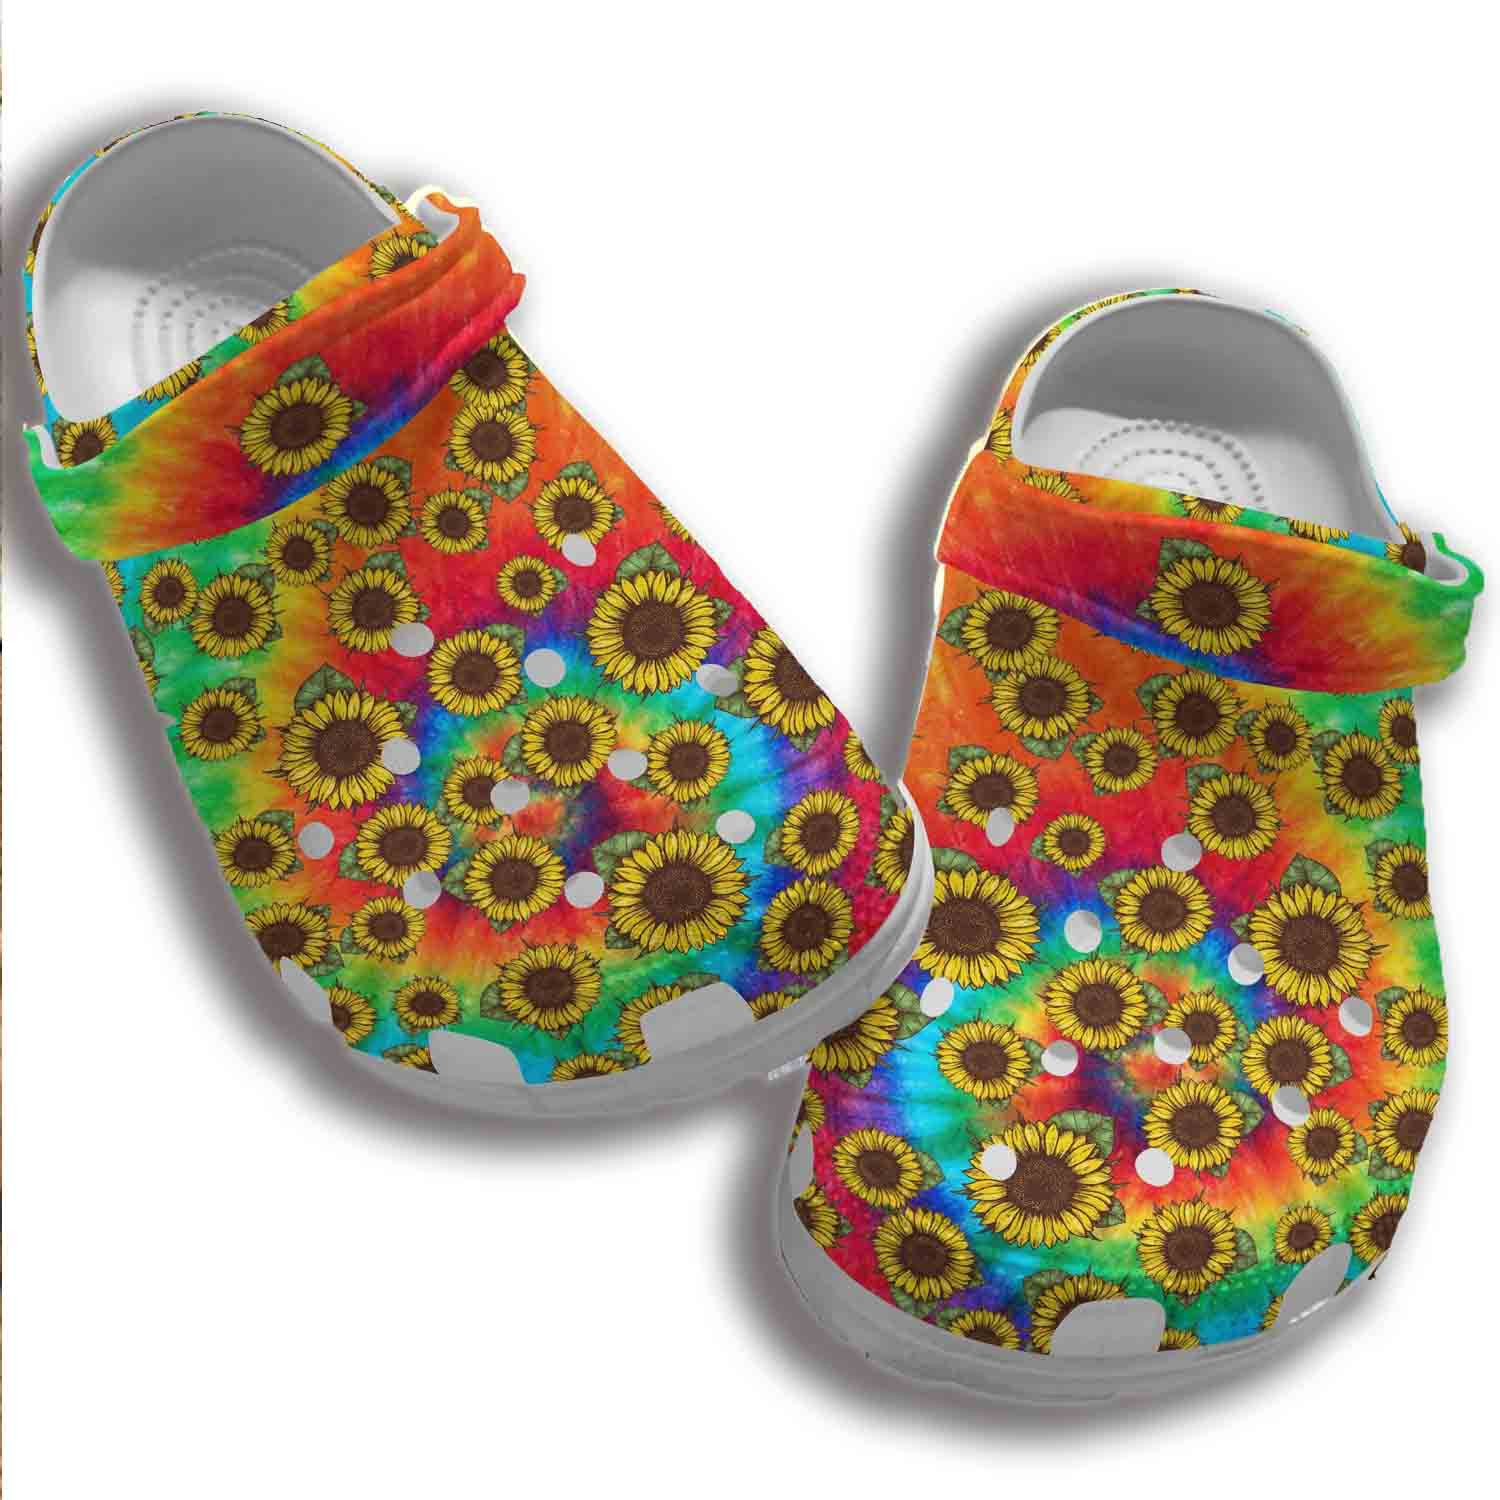 Sunflower Colorful Croc Shoes Women -Be Yourself Shoes Crocbland Clog Birthday Gifts For Daughter Niece